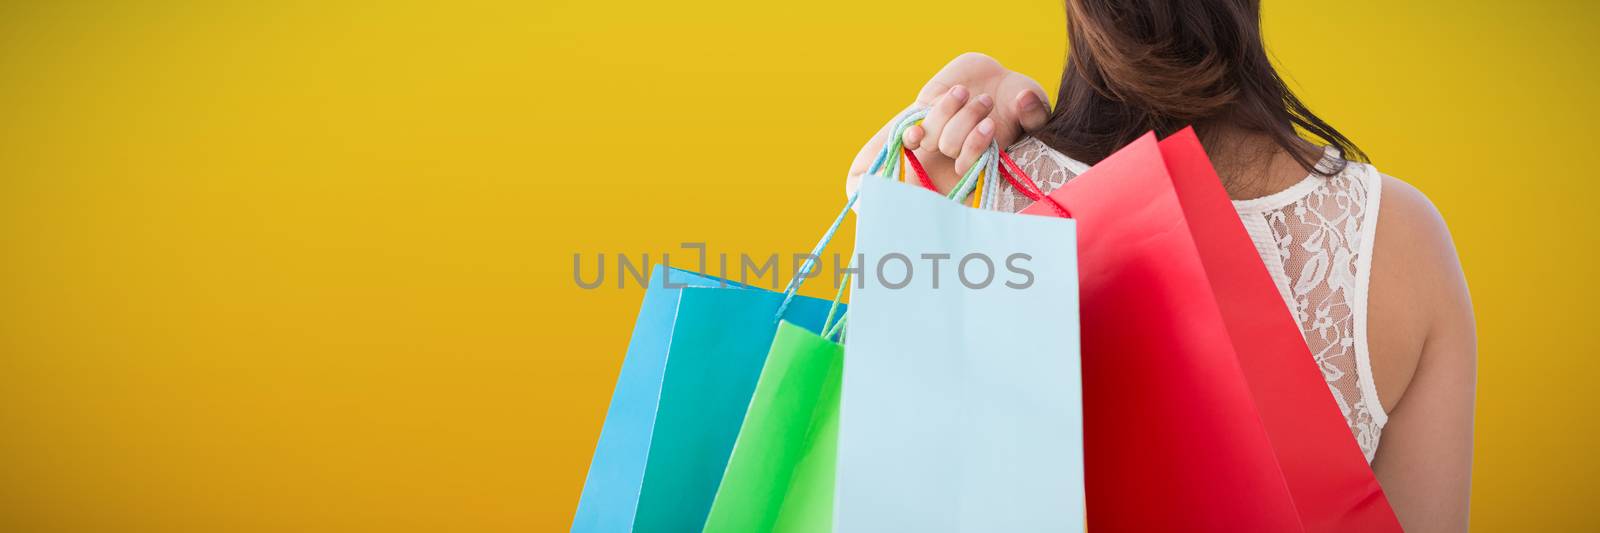 Rear view of brunette holding shopping bags against abstract mustard background